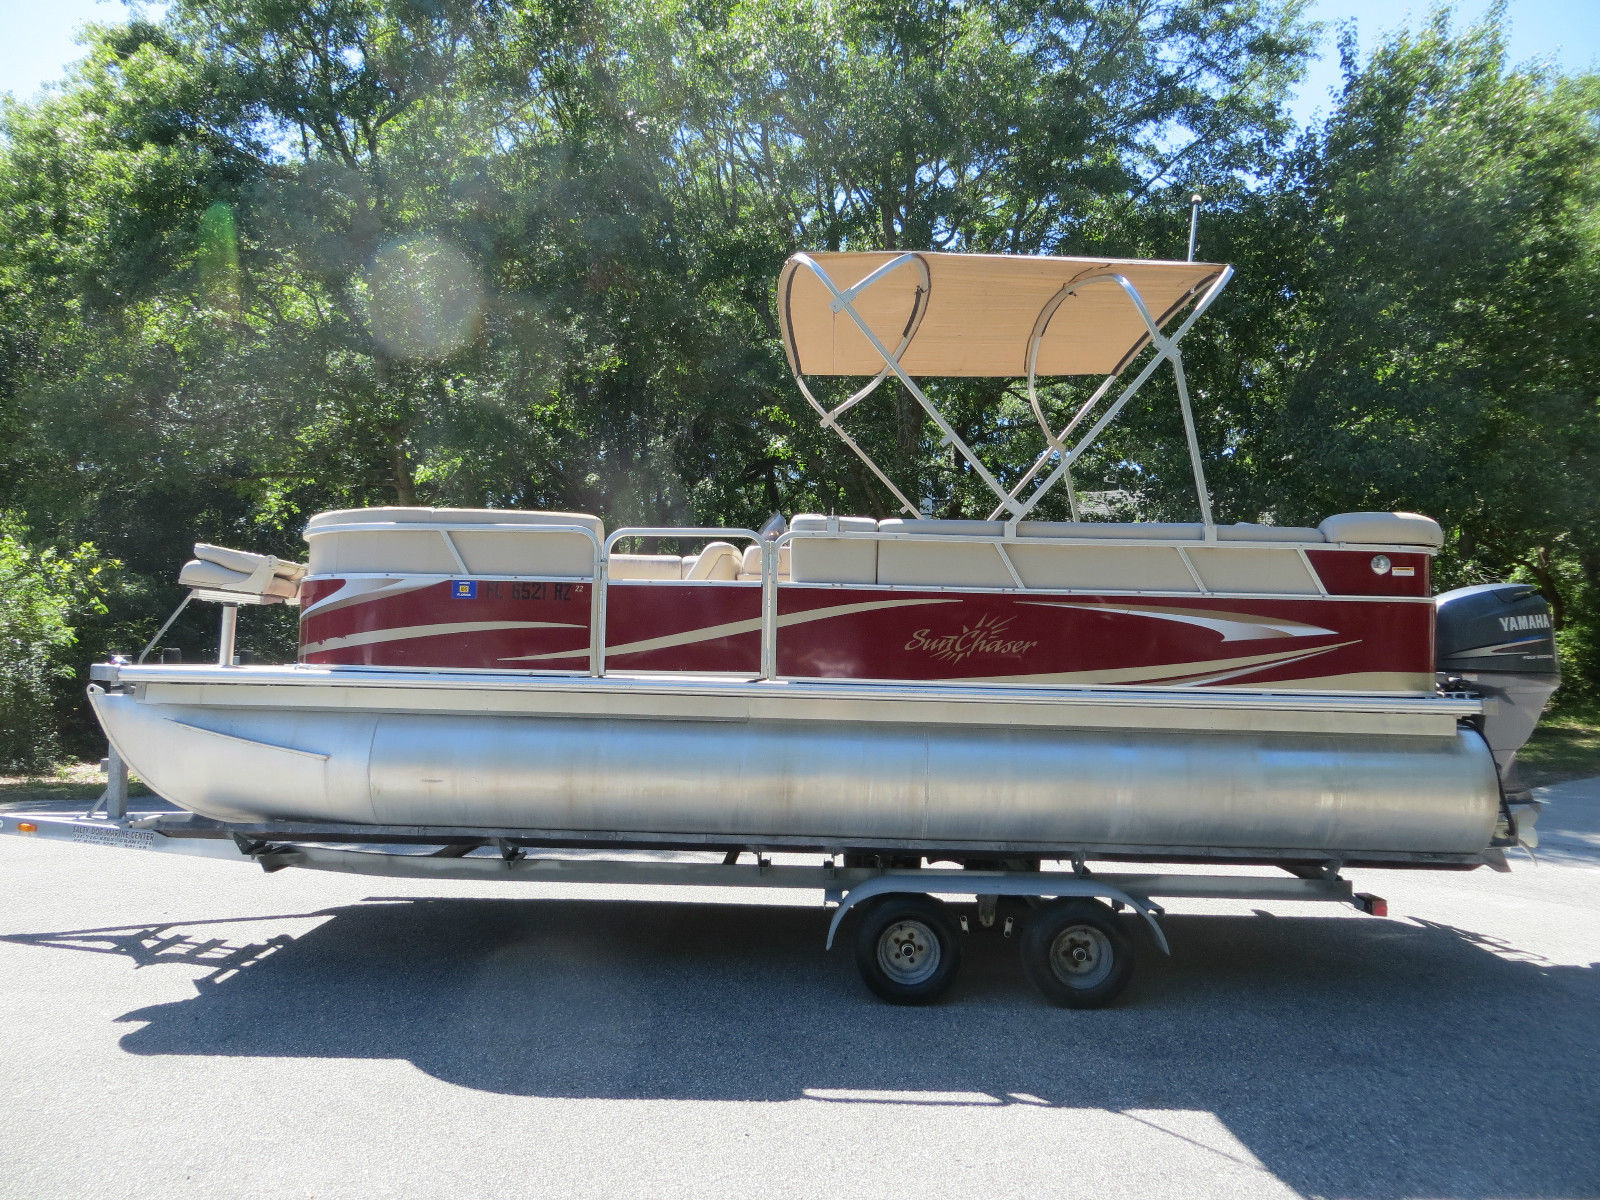 Smoker Craft Sun Chaser 22 Ft 2011 for sale for $13,900 